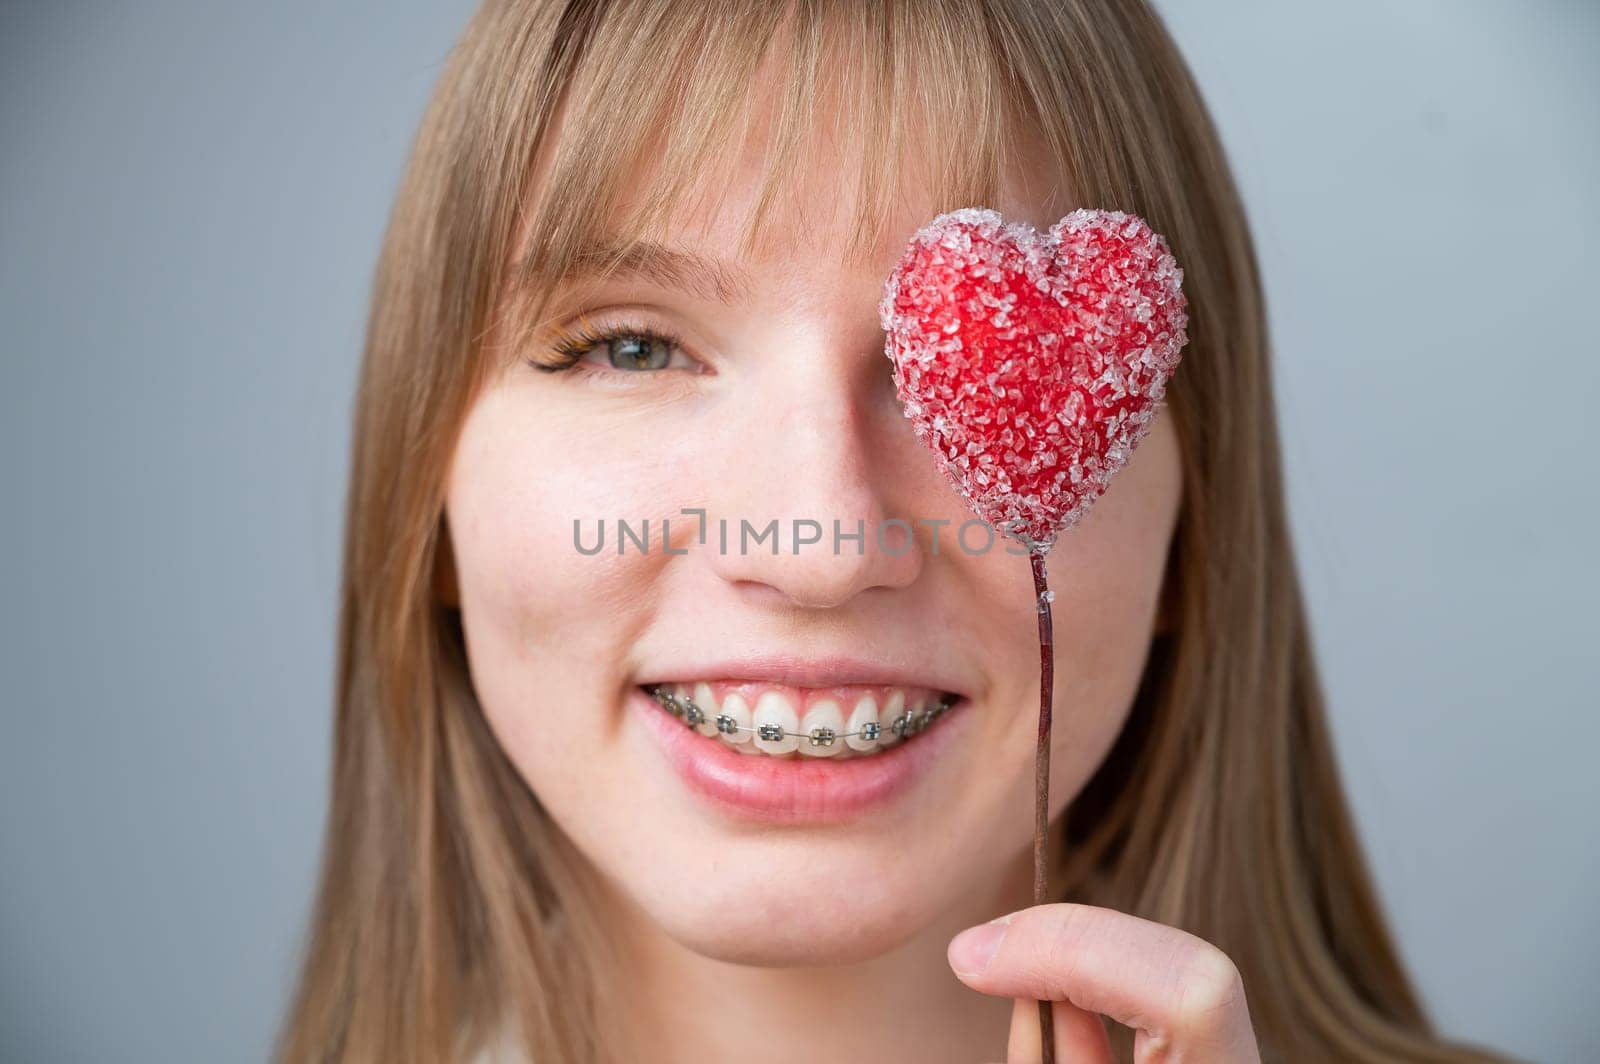 Cute woman with braces on her teeth holds a candy in the form of a heart on white background.